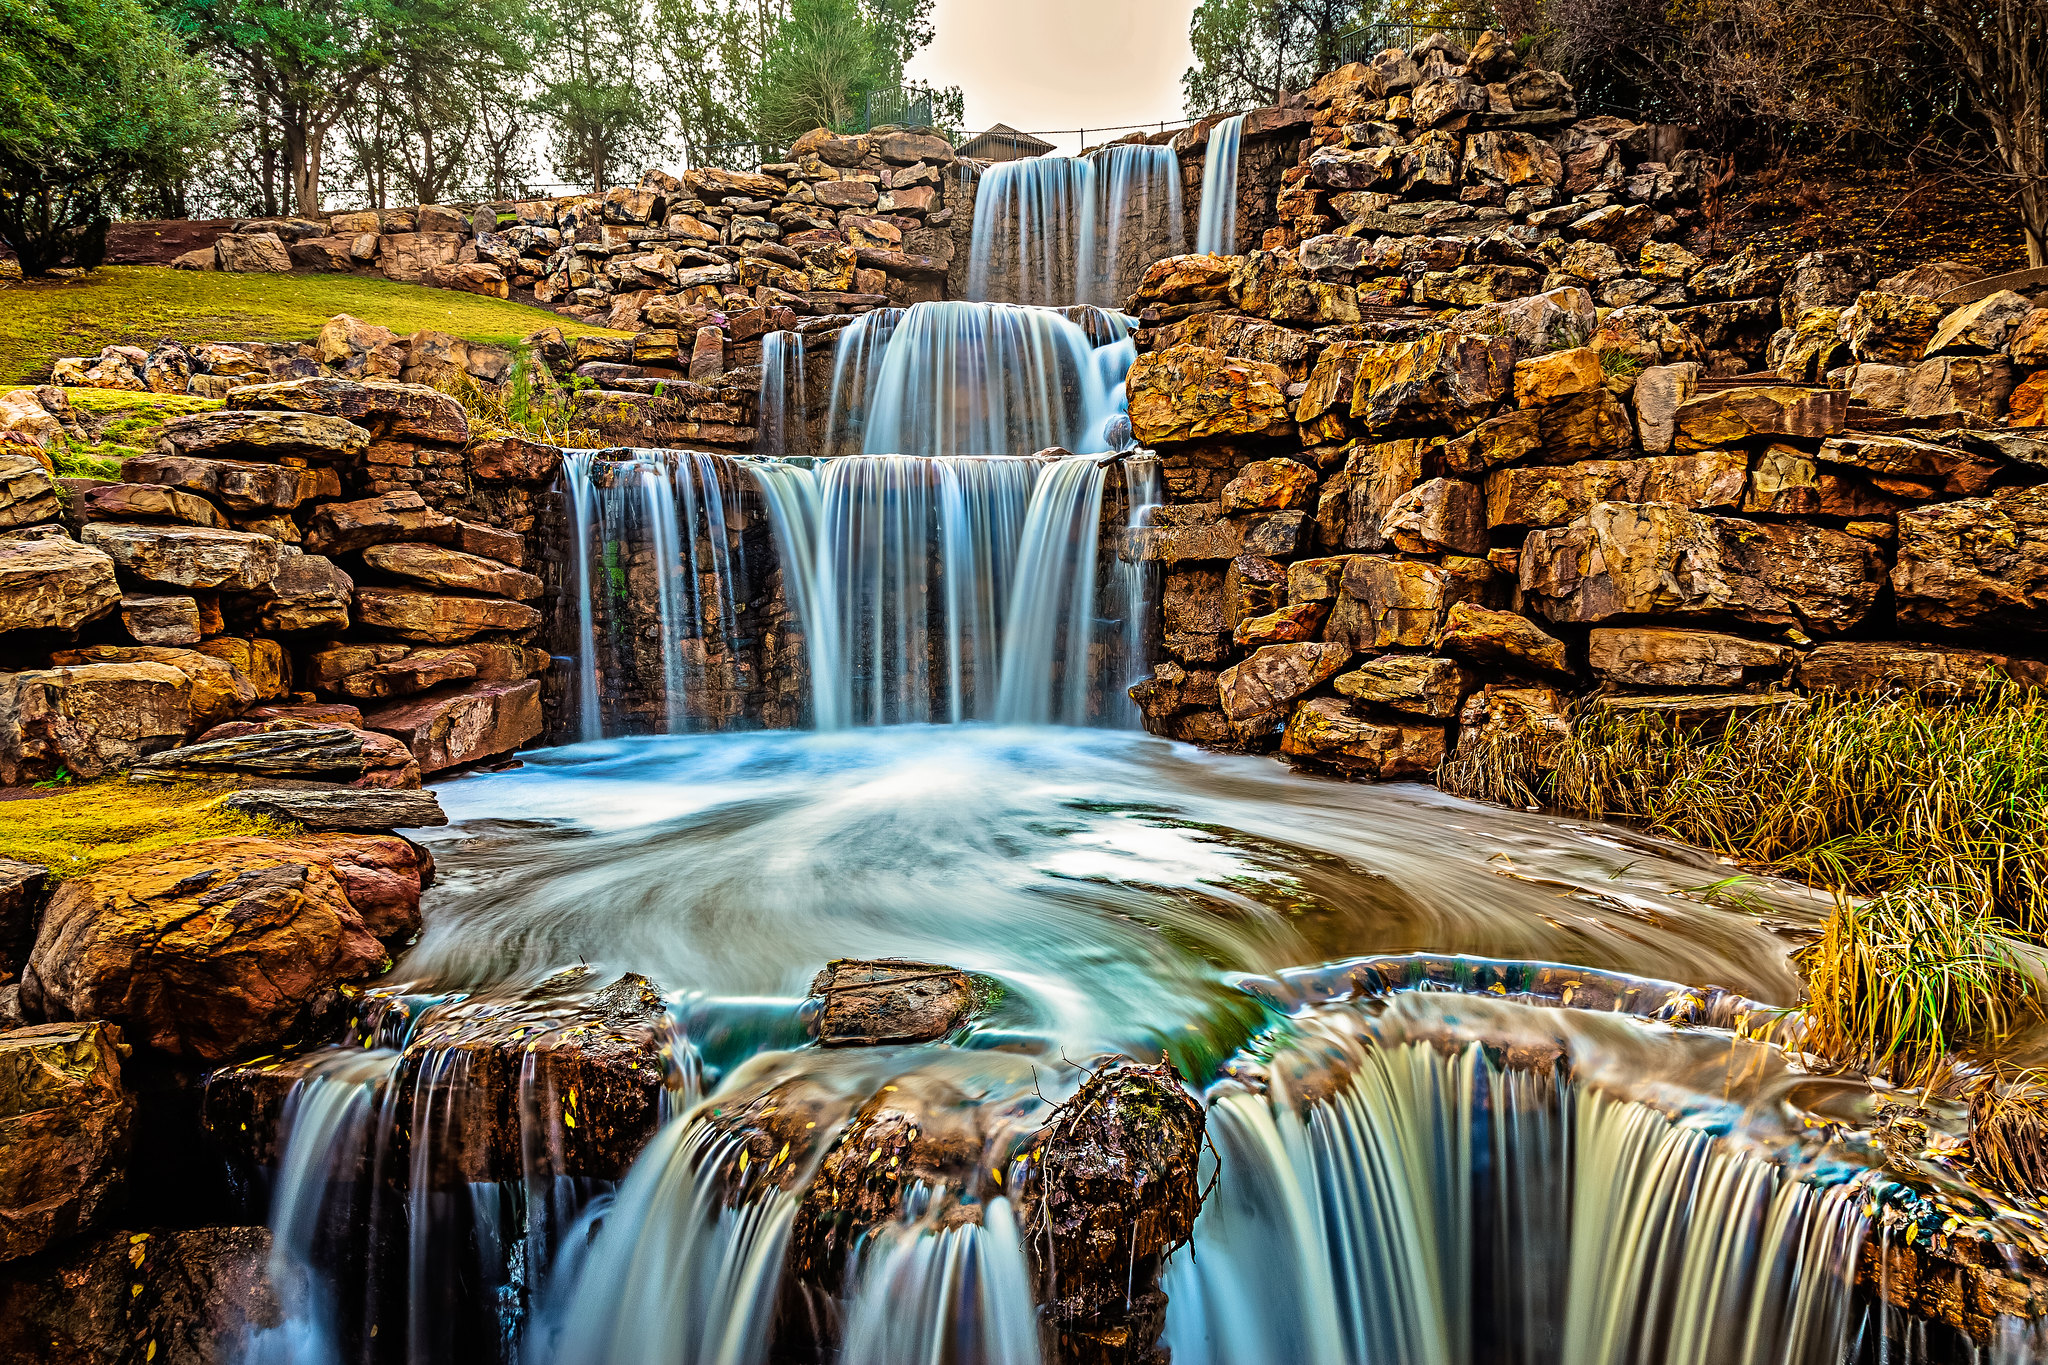 Triple Waterfall At Lucy Park In Wichita Falls Texas 5188